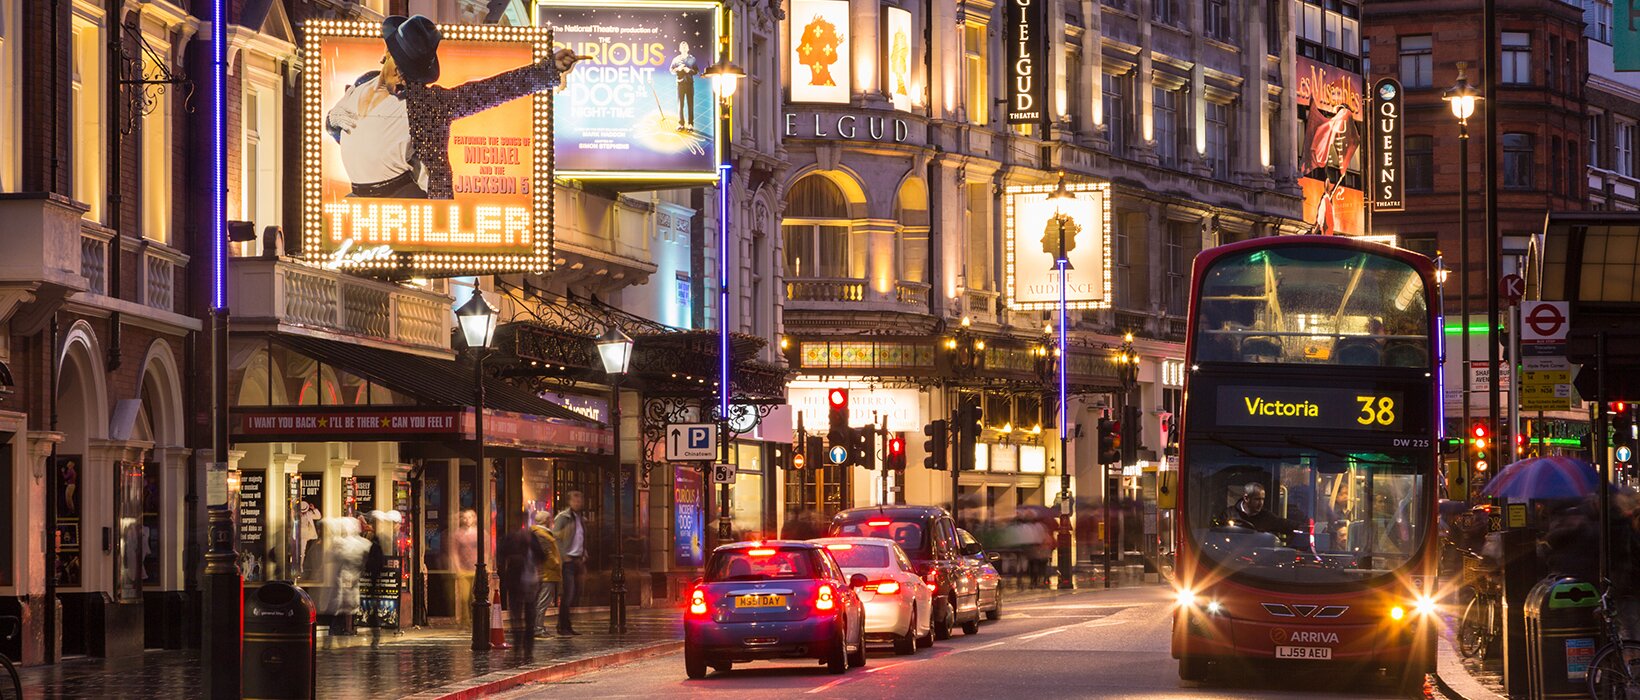 West End hospitality businesses suffer 20% loss in sales due to staff shortages